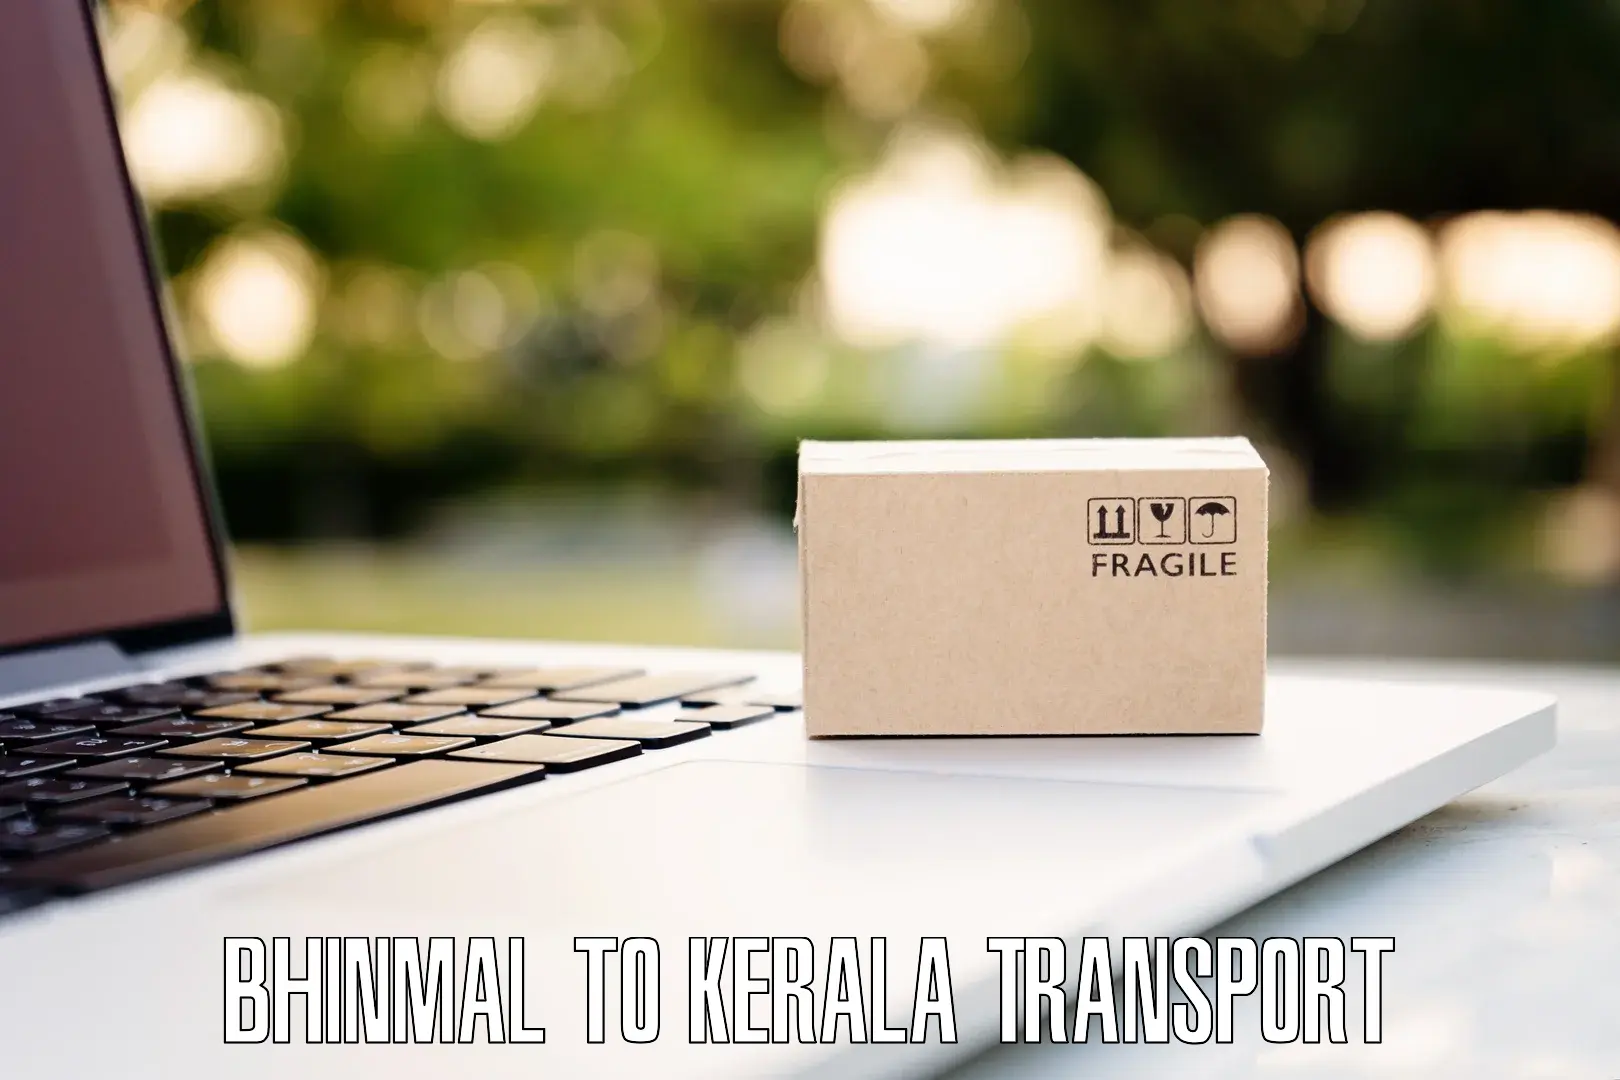 Nearby transport service Bhinmal to Kerala